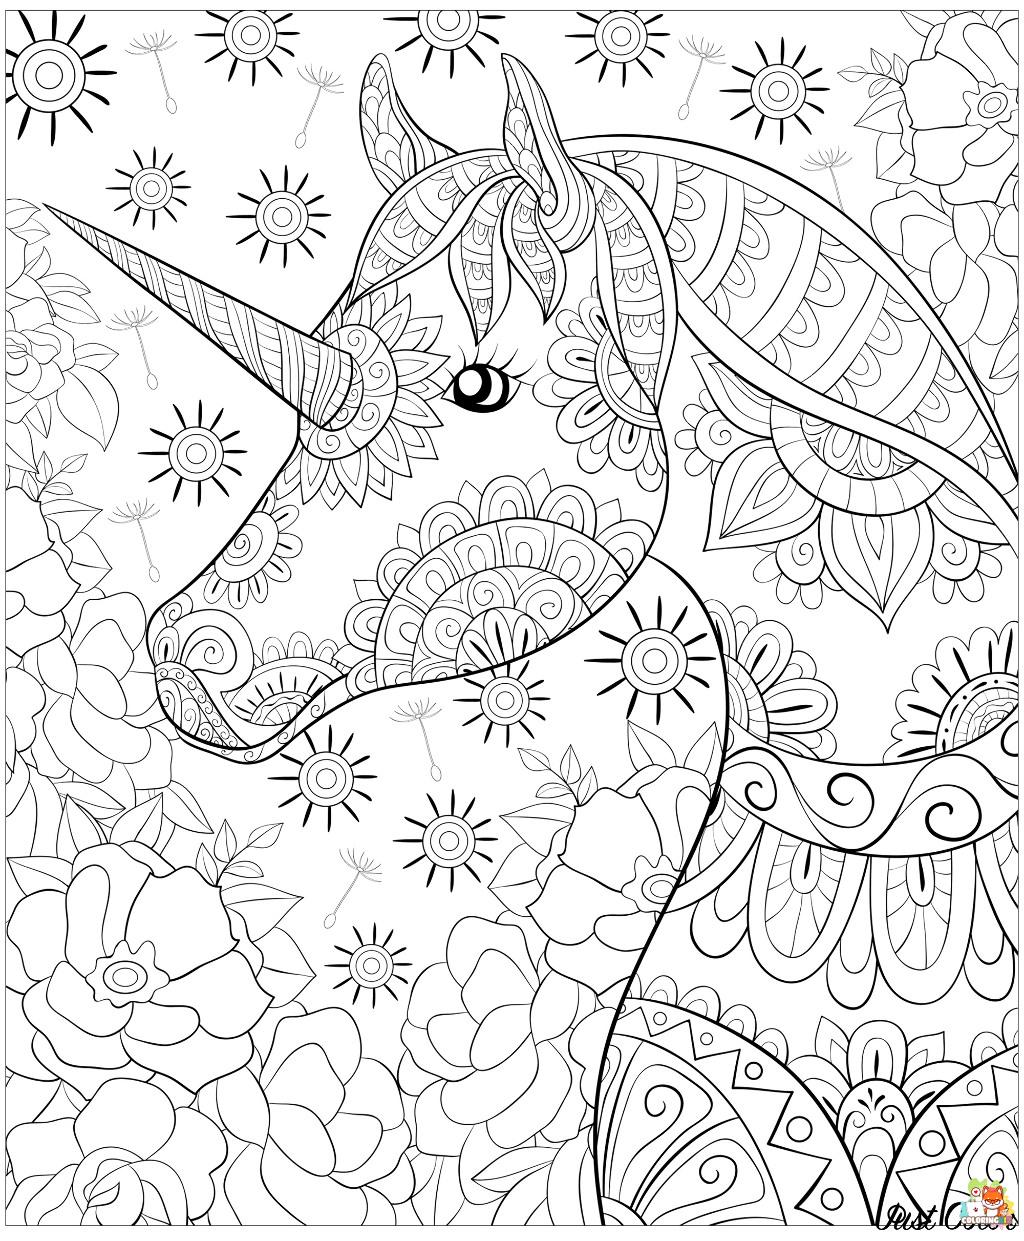 Unicorn Zentangle Coloring Pages 8